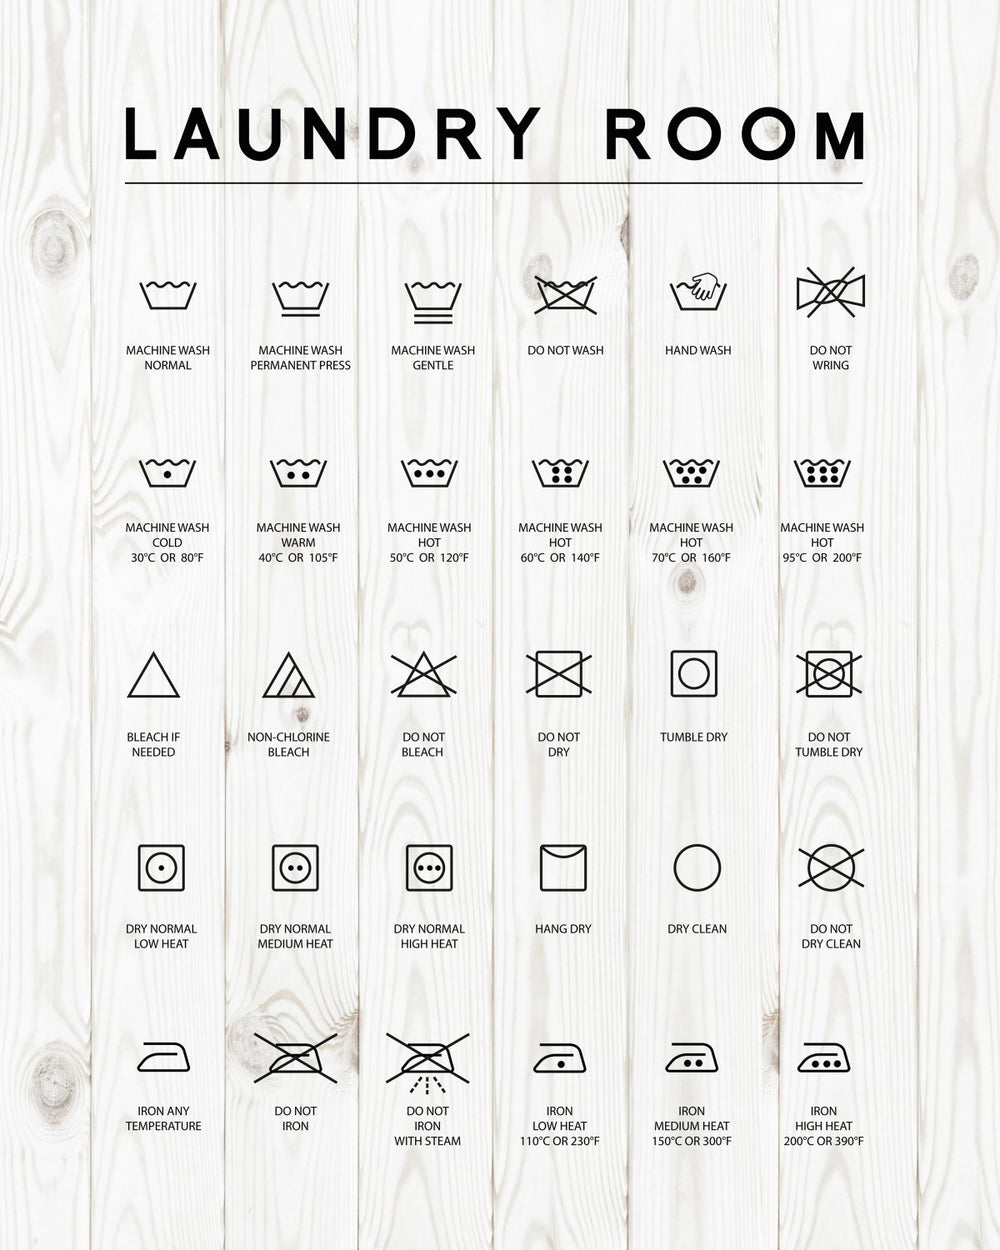 Laundry Room Guidelines